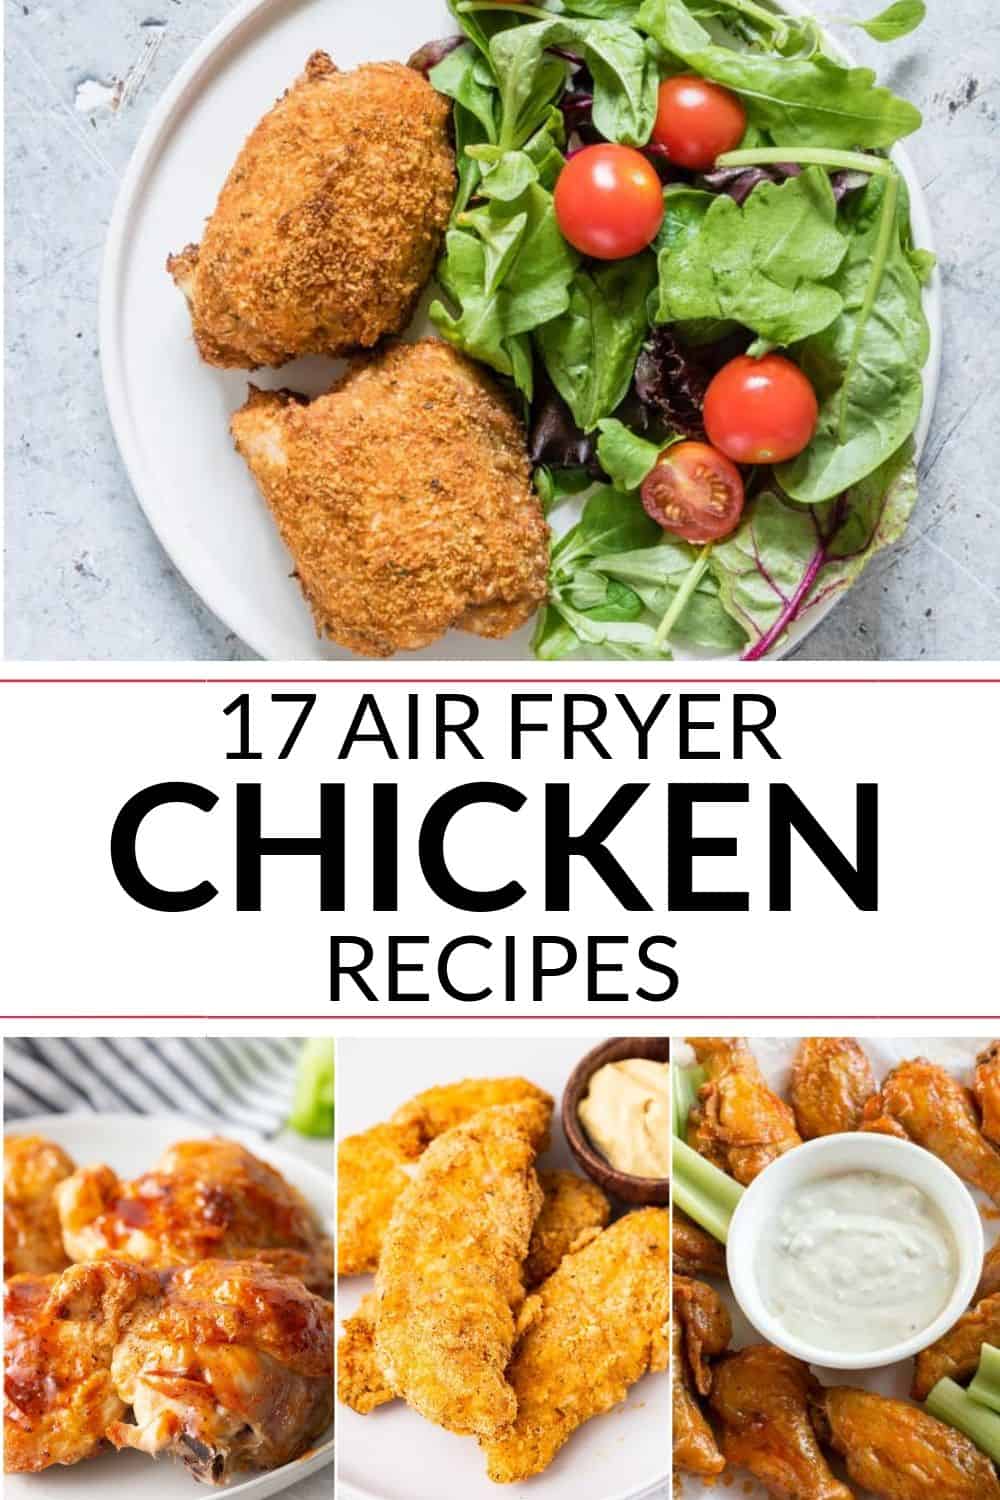 A collection of air fryer chicken recipes